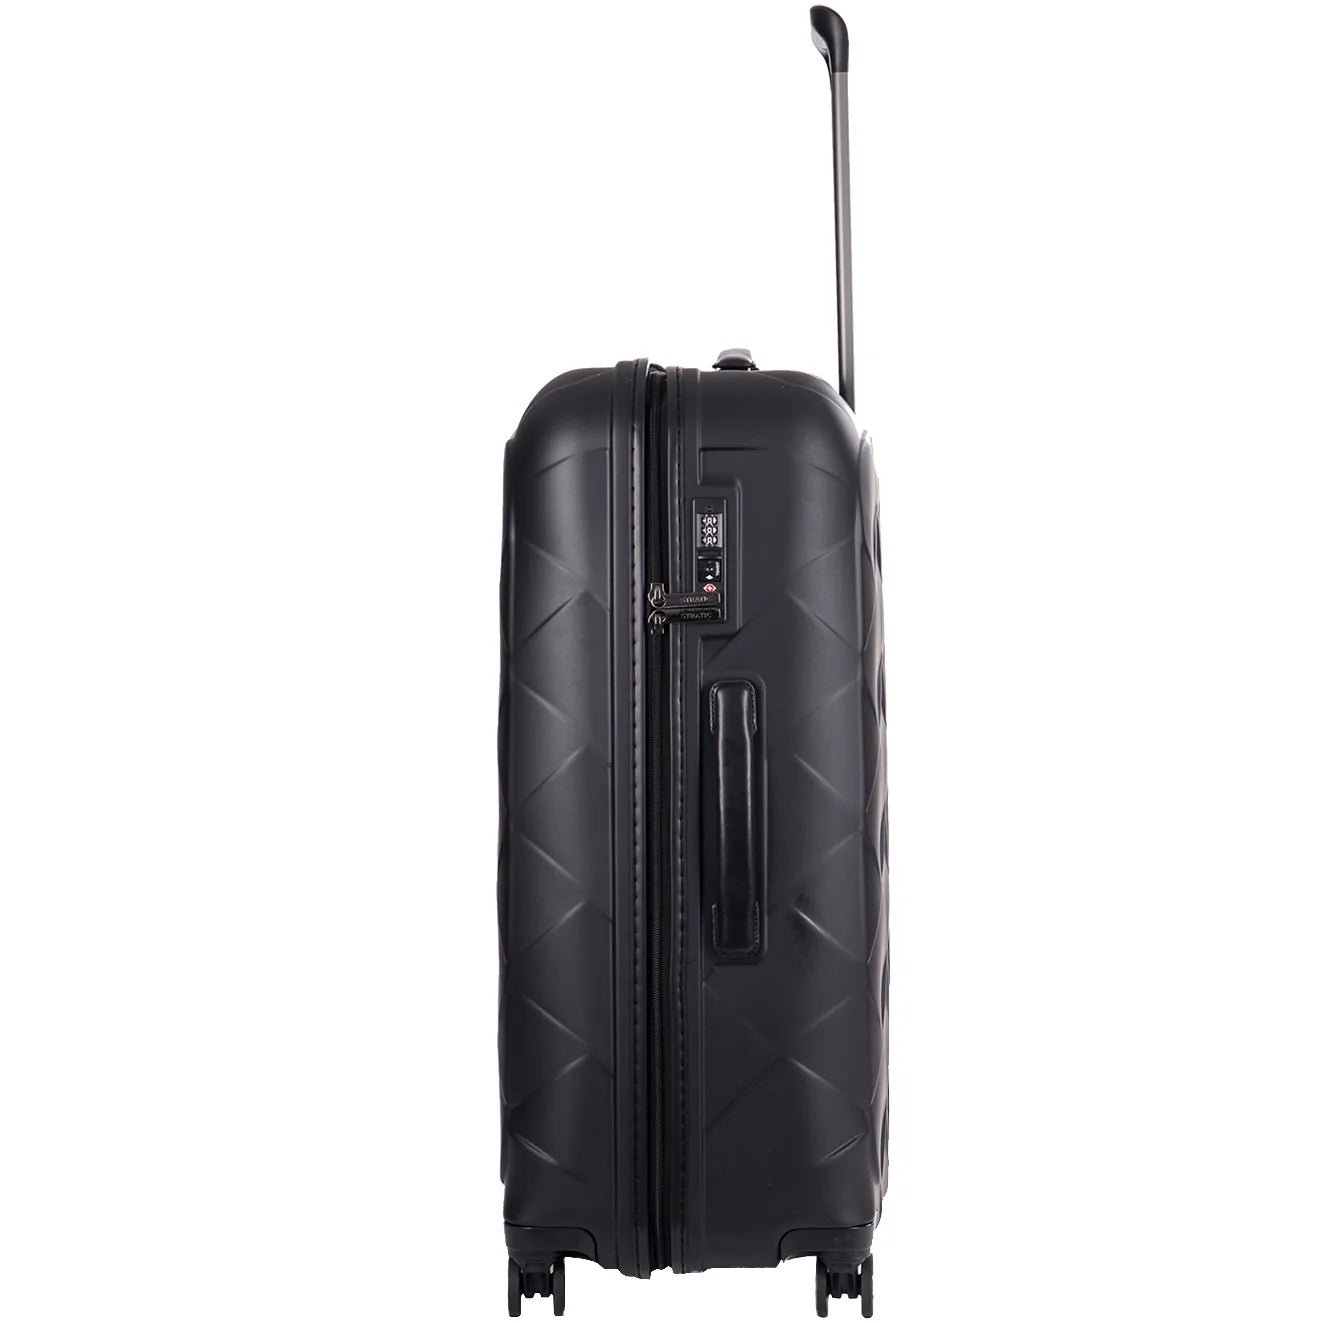 Stratic Leather & More 4-Rollen-Trolley 76 cm - champagne